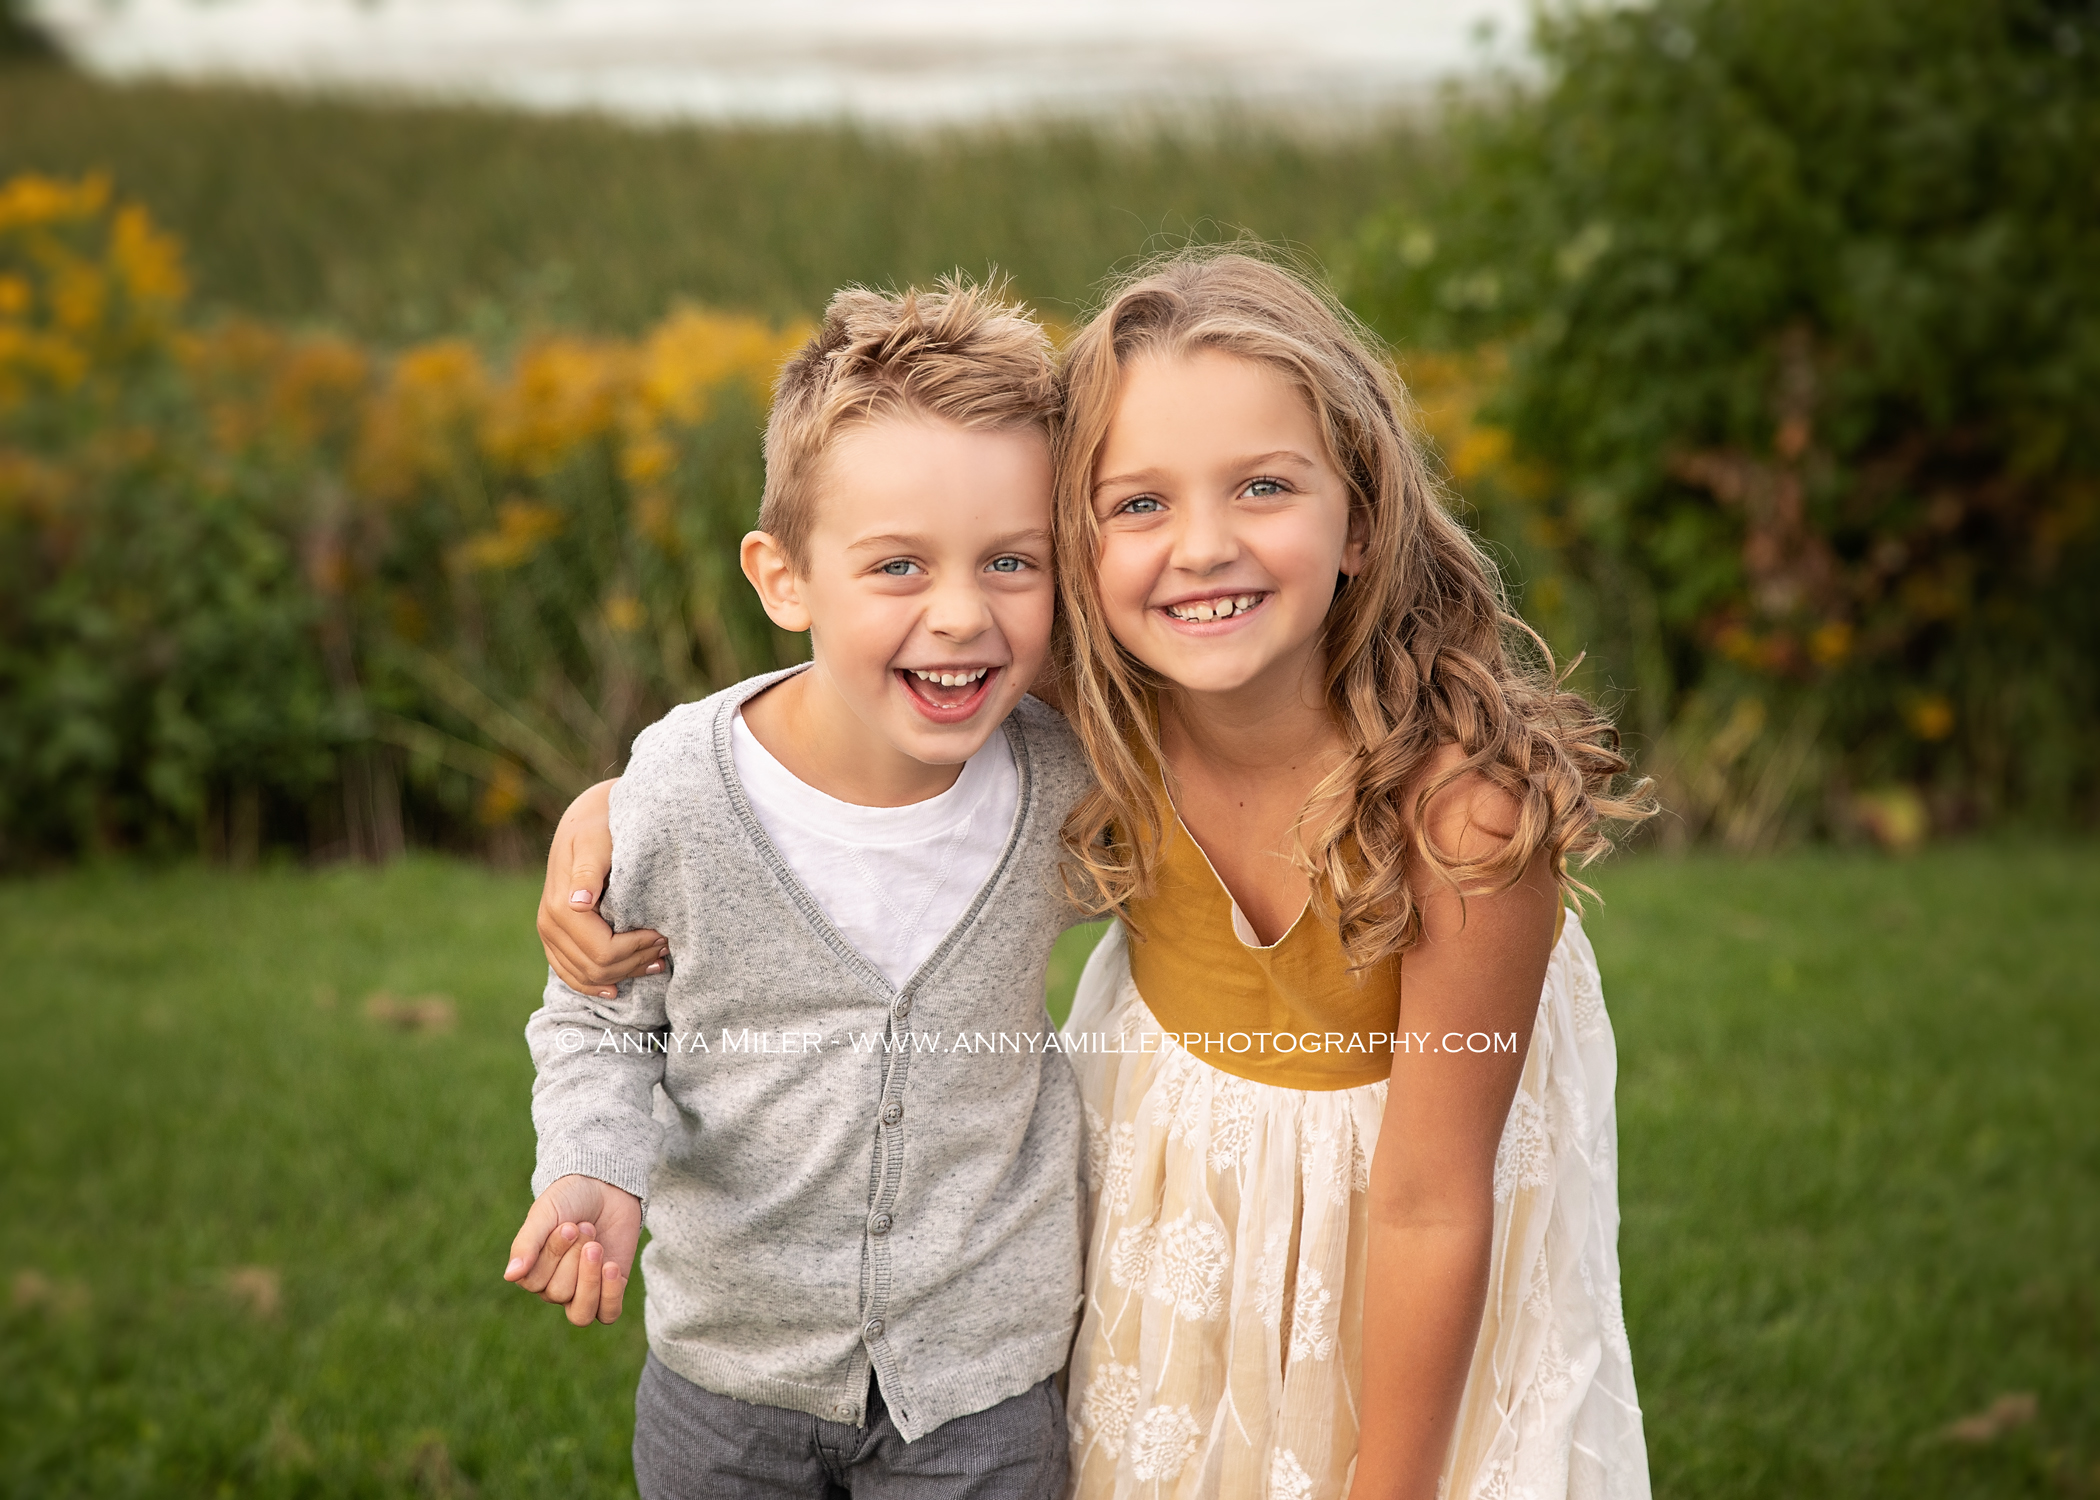 Outdoor portraits by pickering family photographer Annya Miller